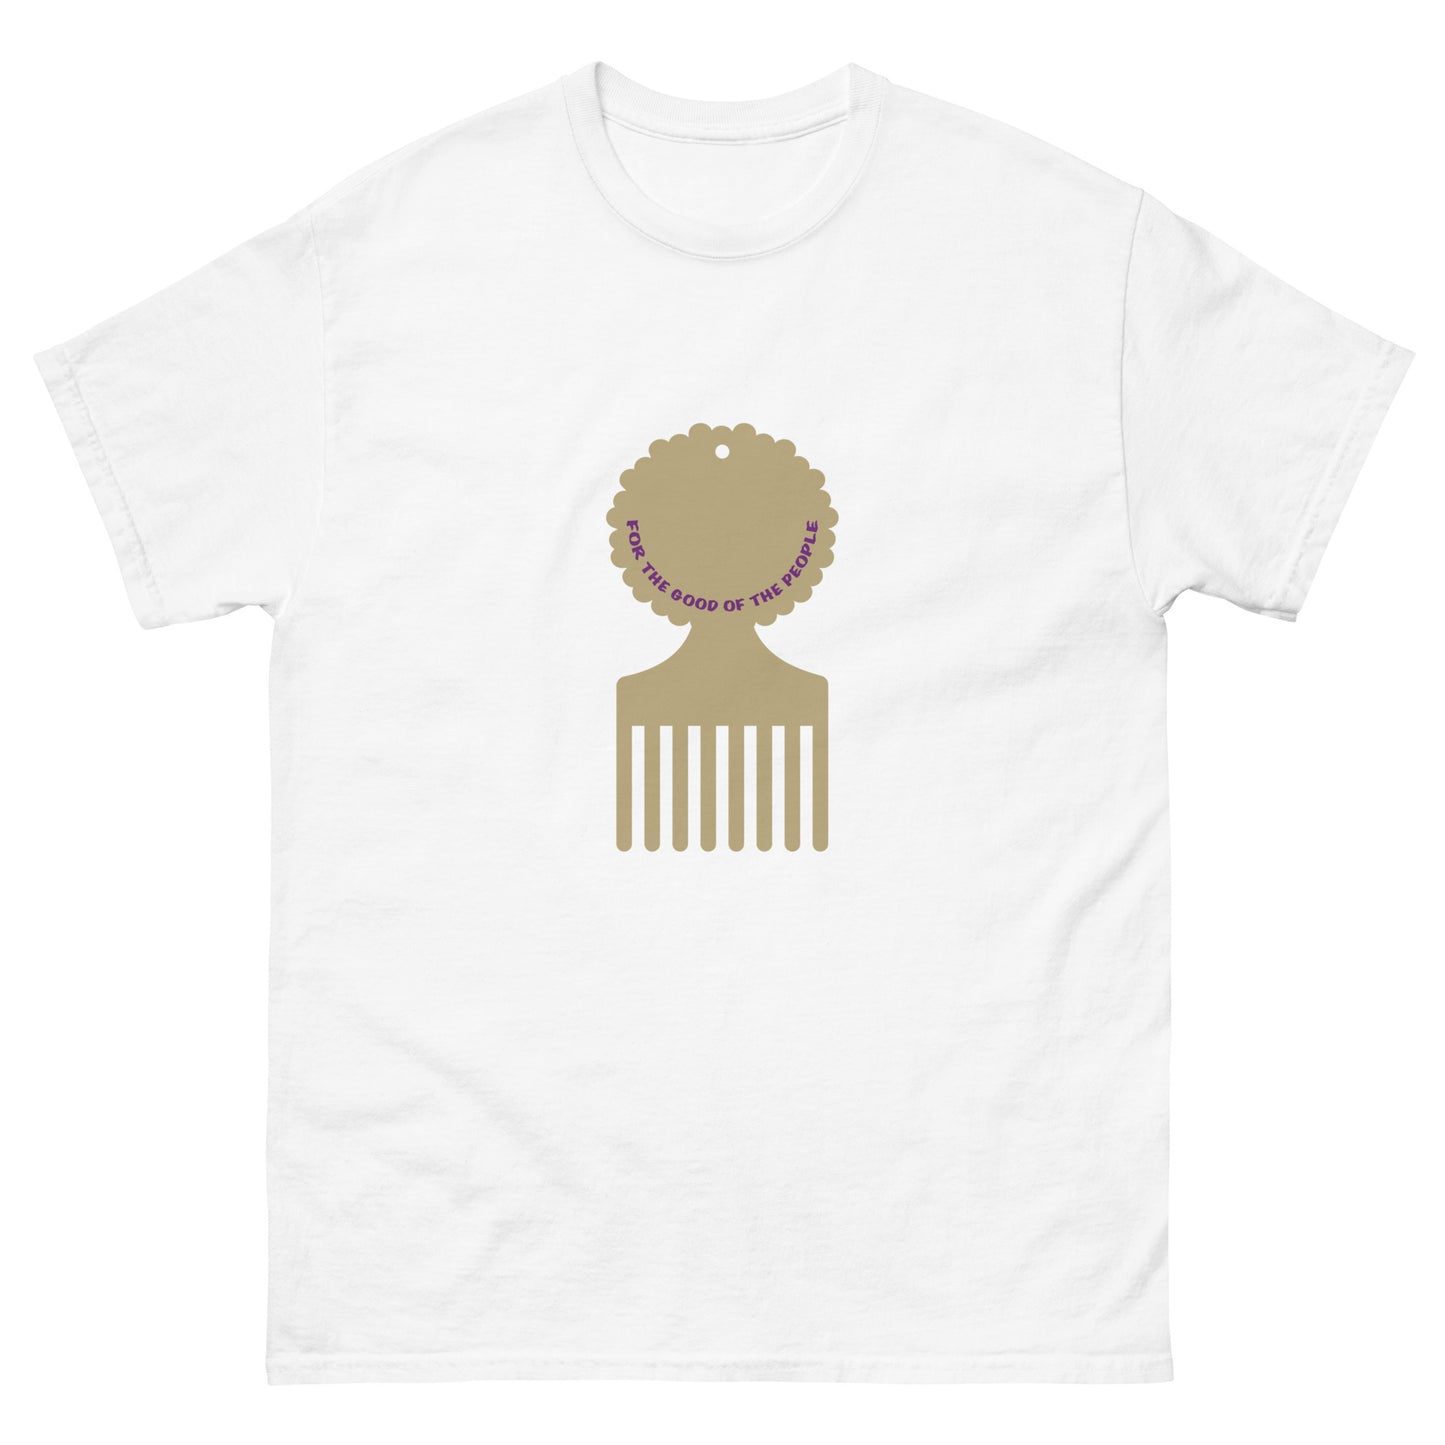 Men's white tee with gold afro pick in the center of shirt, with for the good of the people in purple inside the afro pick's handle.